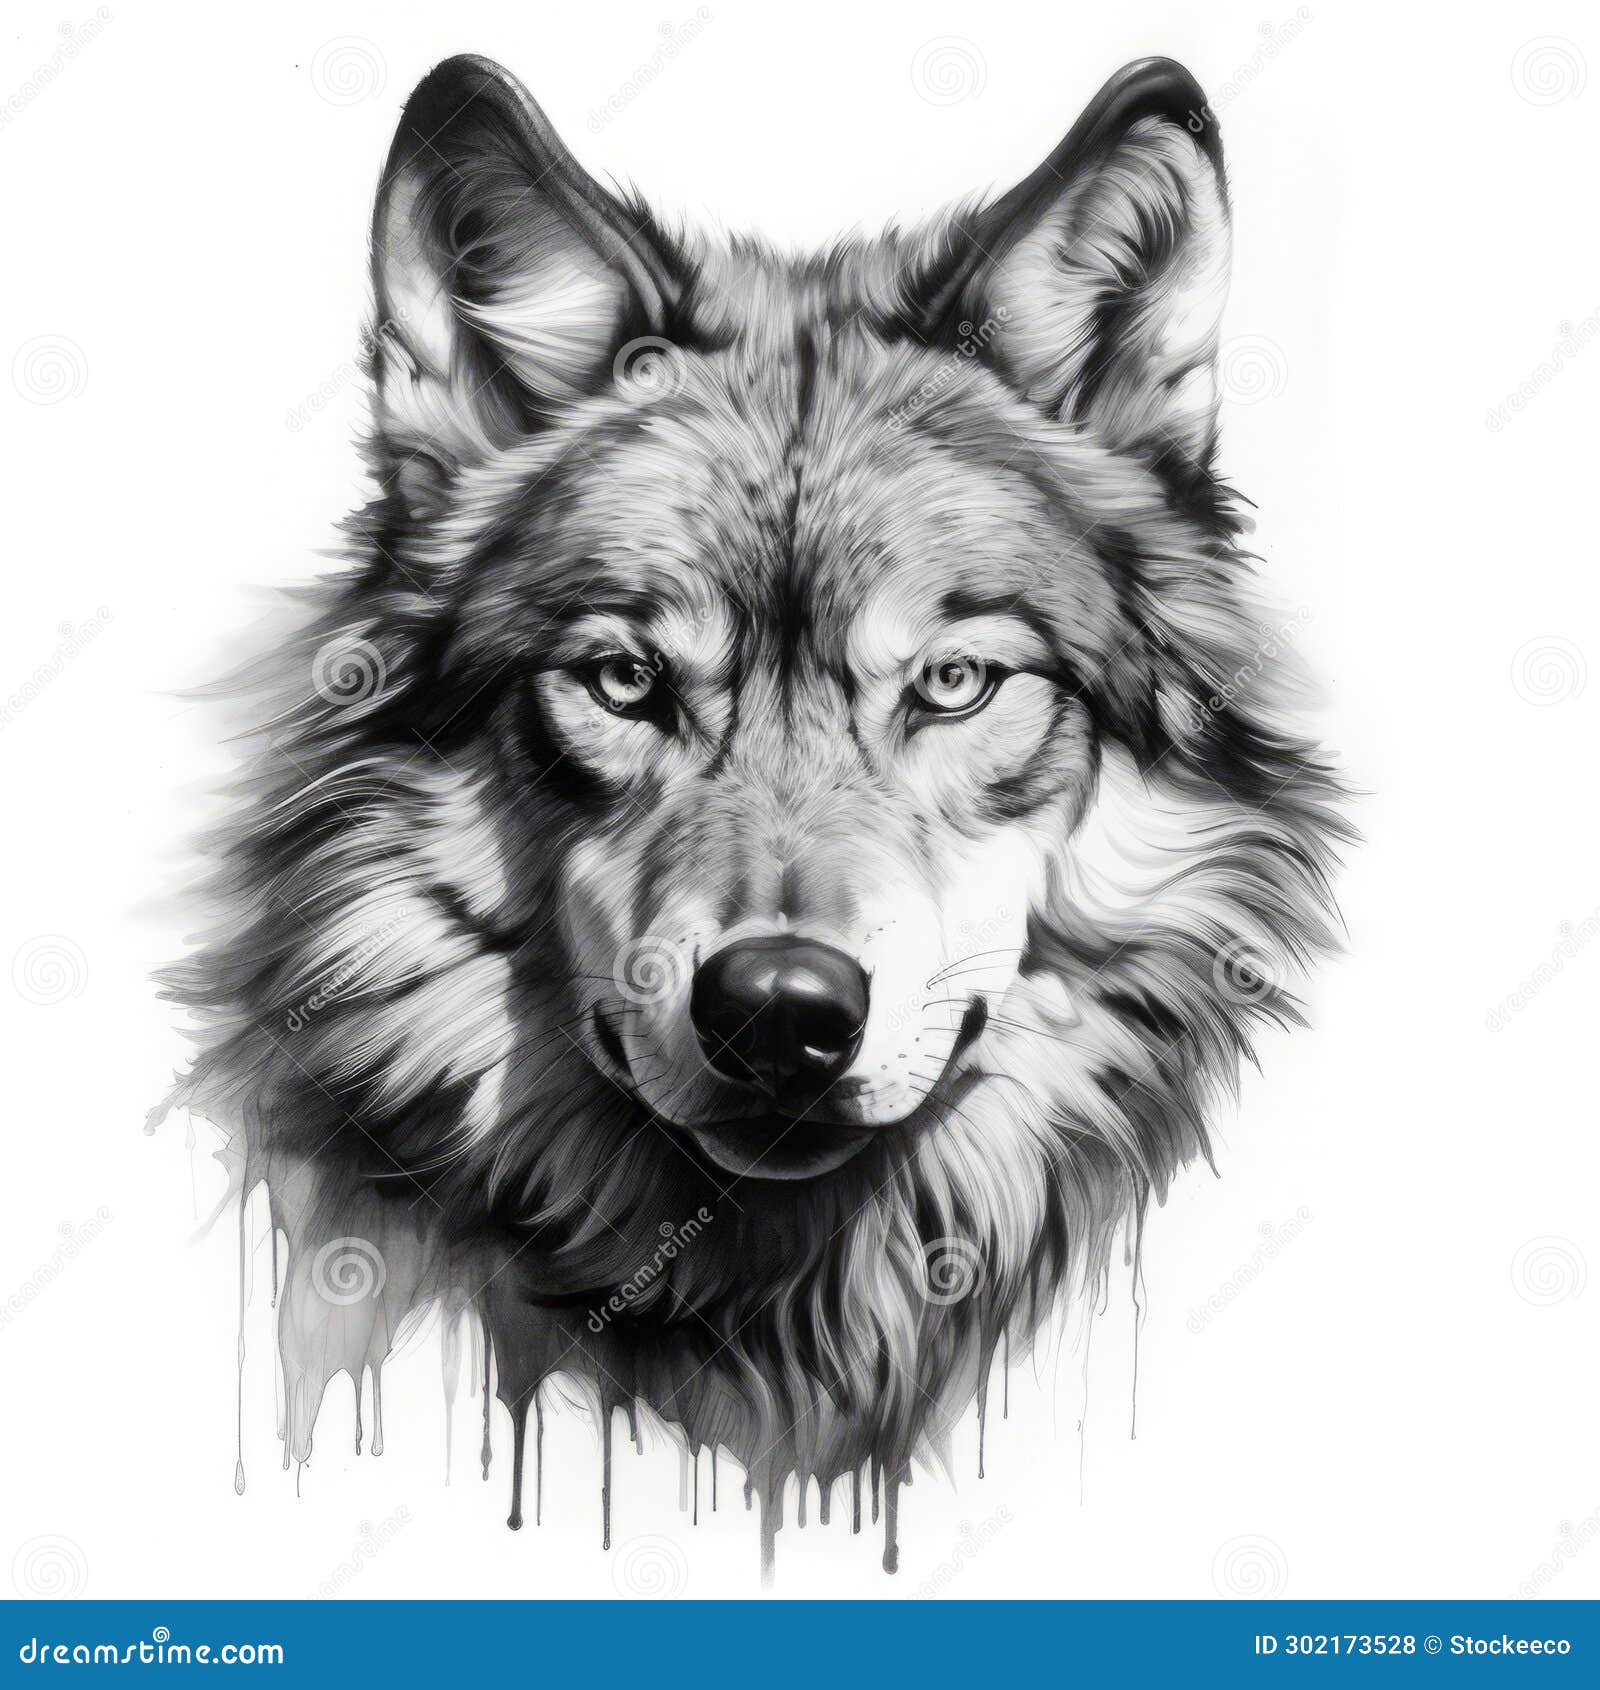 Watercolor portrait of two of wolves tattoo on shoulder | Animal tattoos, Wolf  tattoo, Wolf tattoos